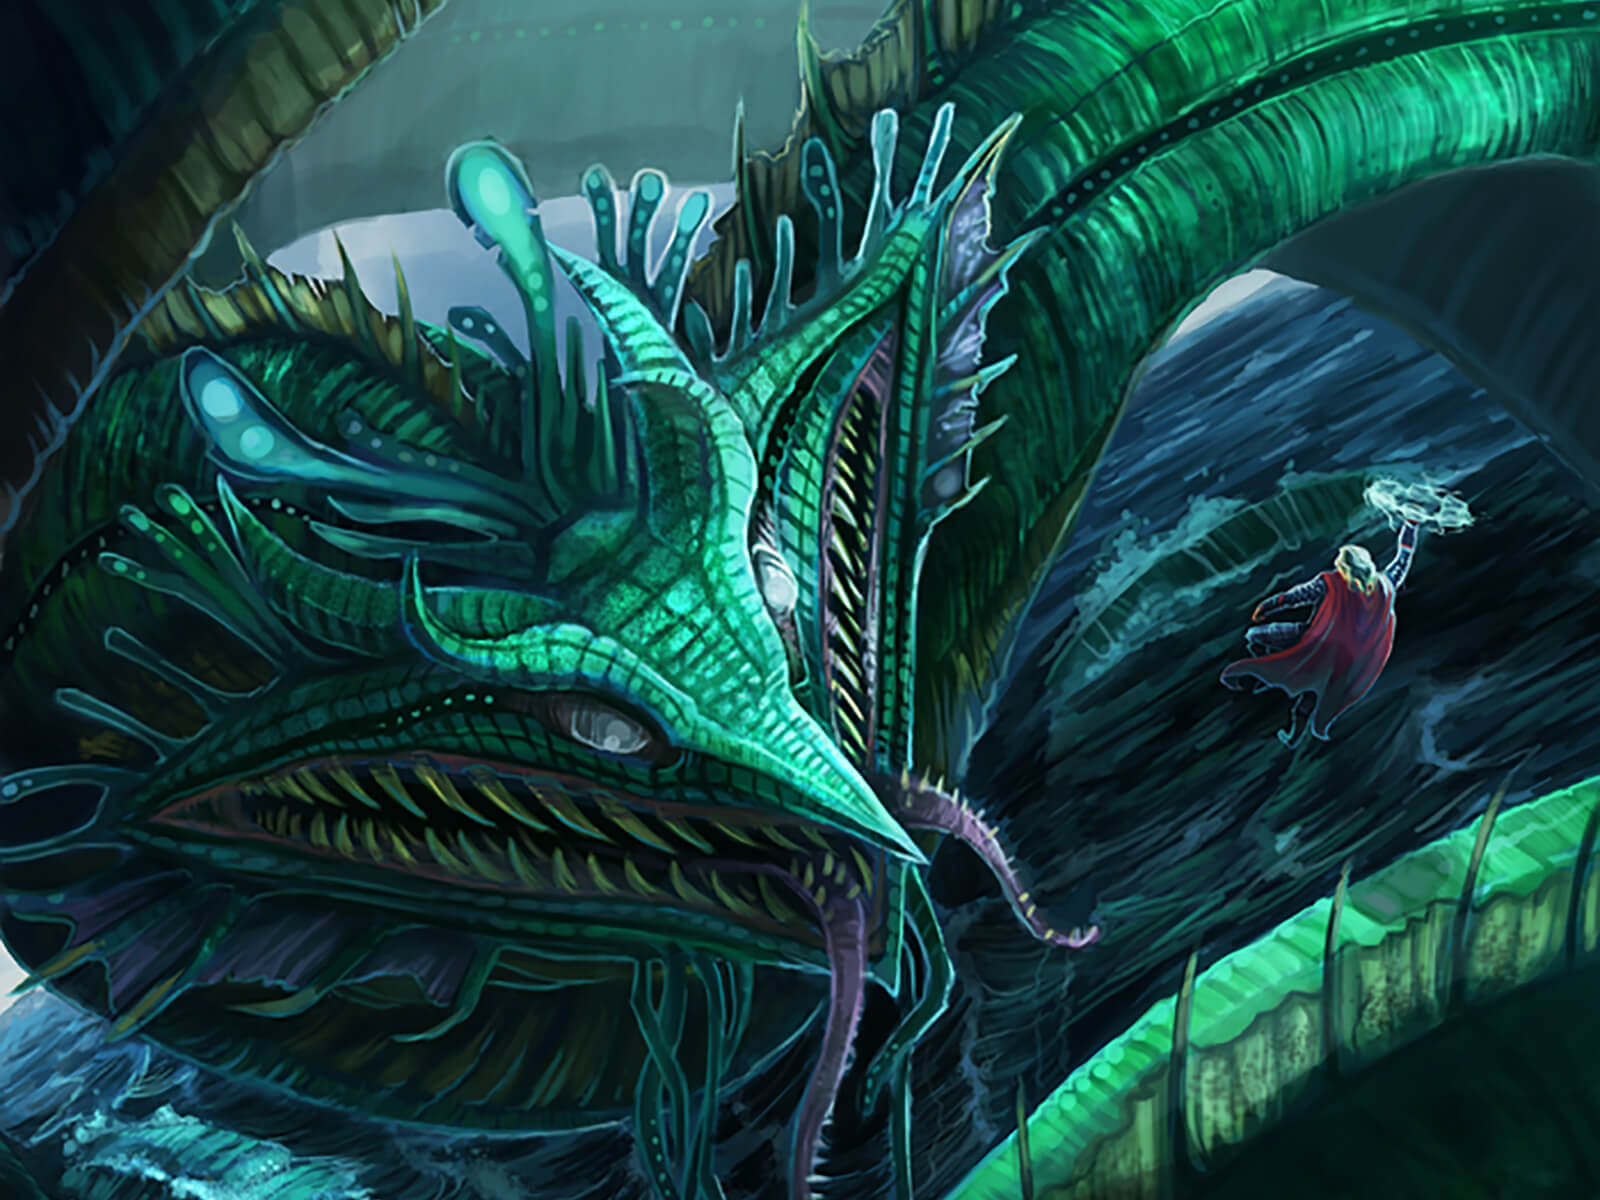 A man in a red cape hovers in the air brandishing a glowing hammer at a green sea-serpent monster rising from the waves.